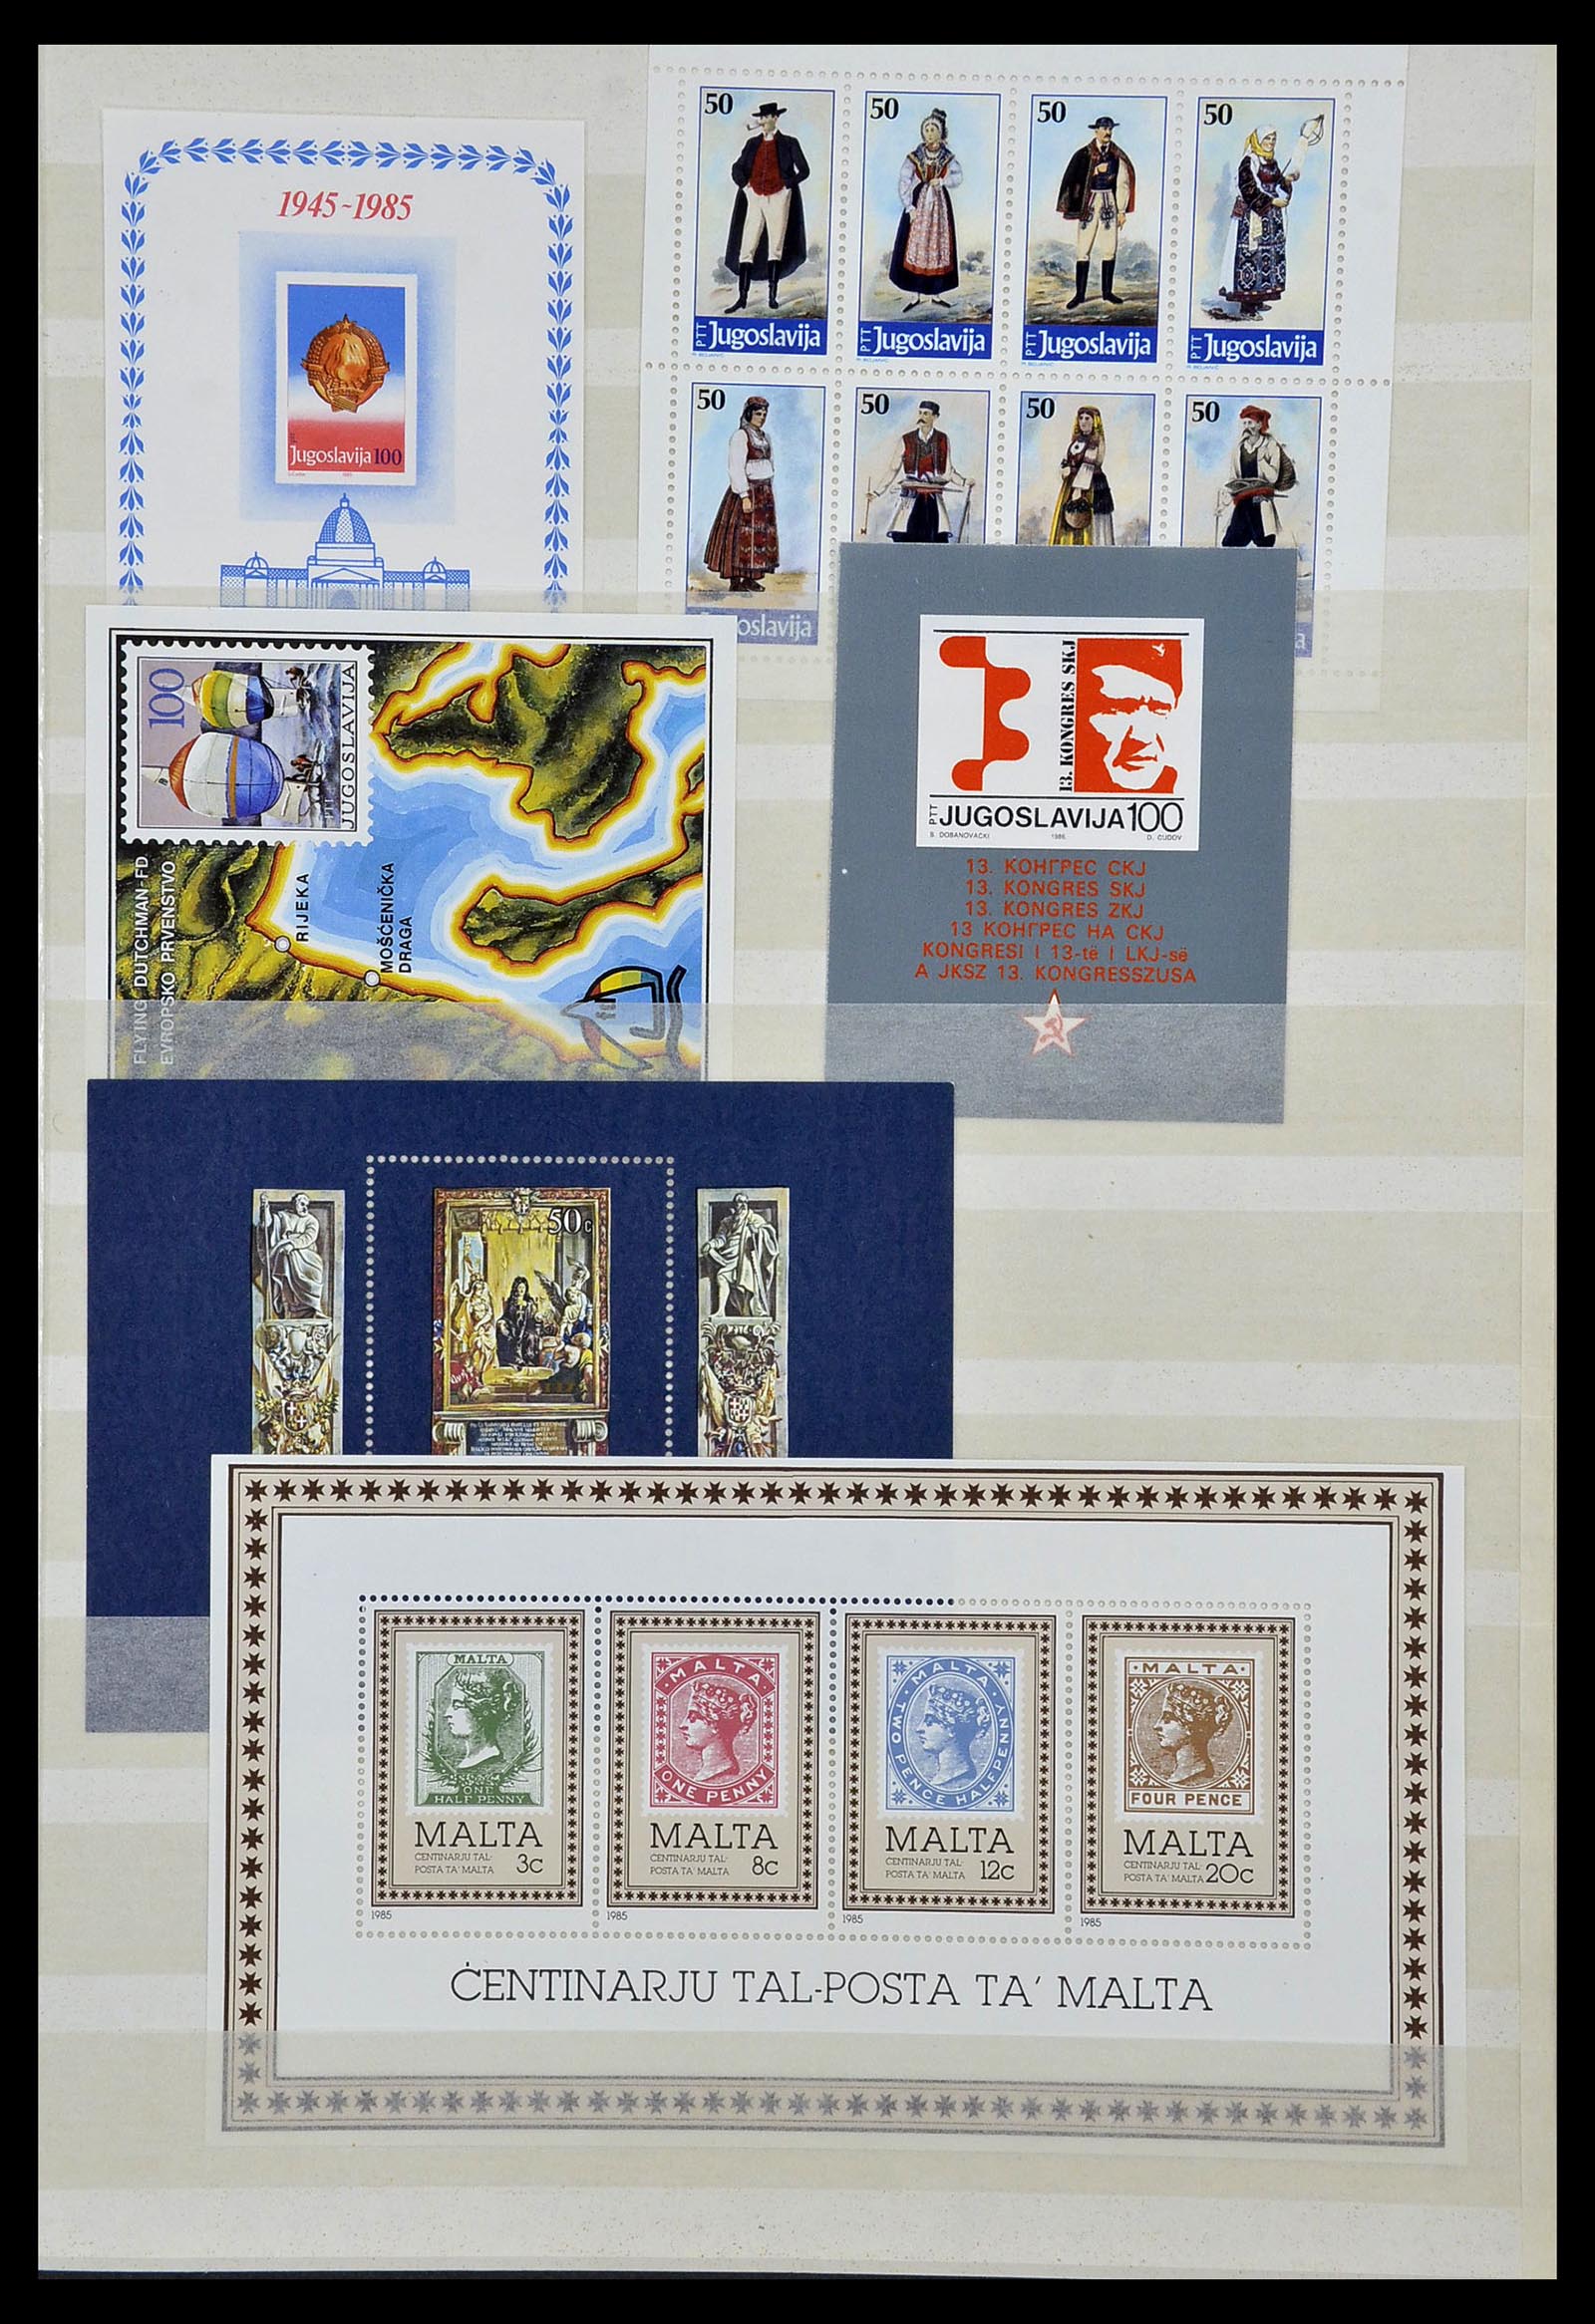 34045 037 - Stamp collection 34045 Western Europe souvenir sheets 1973-1986.